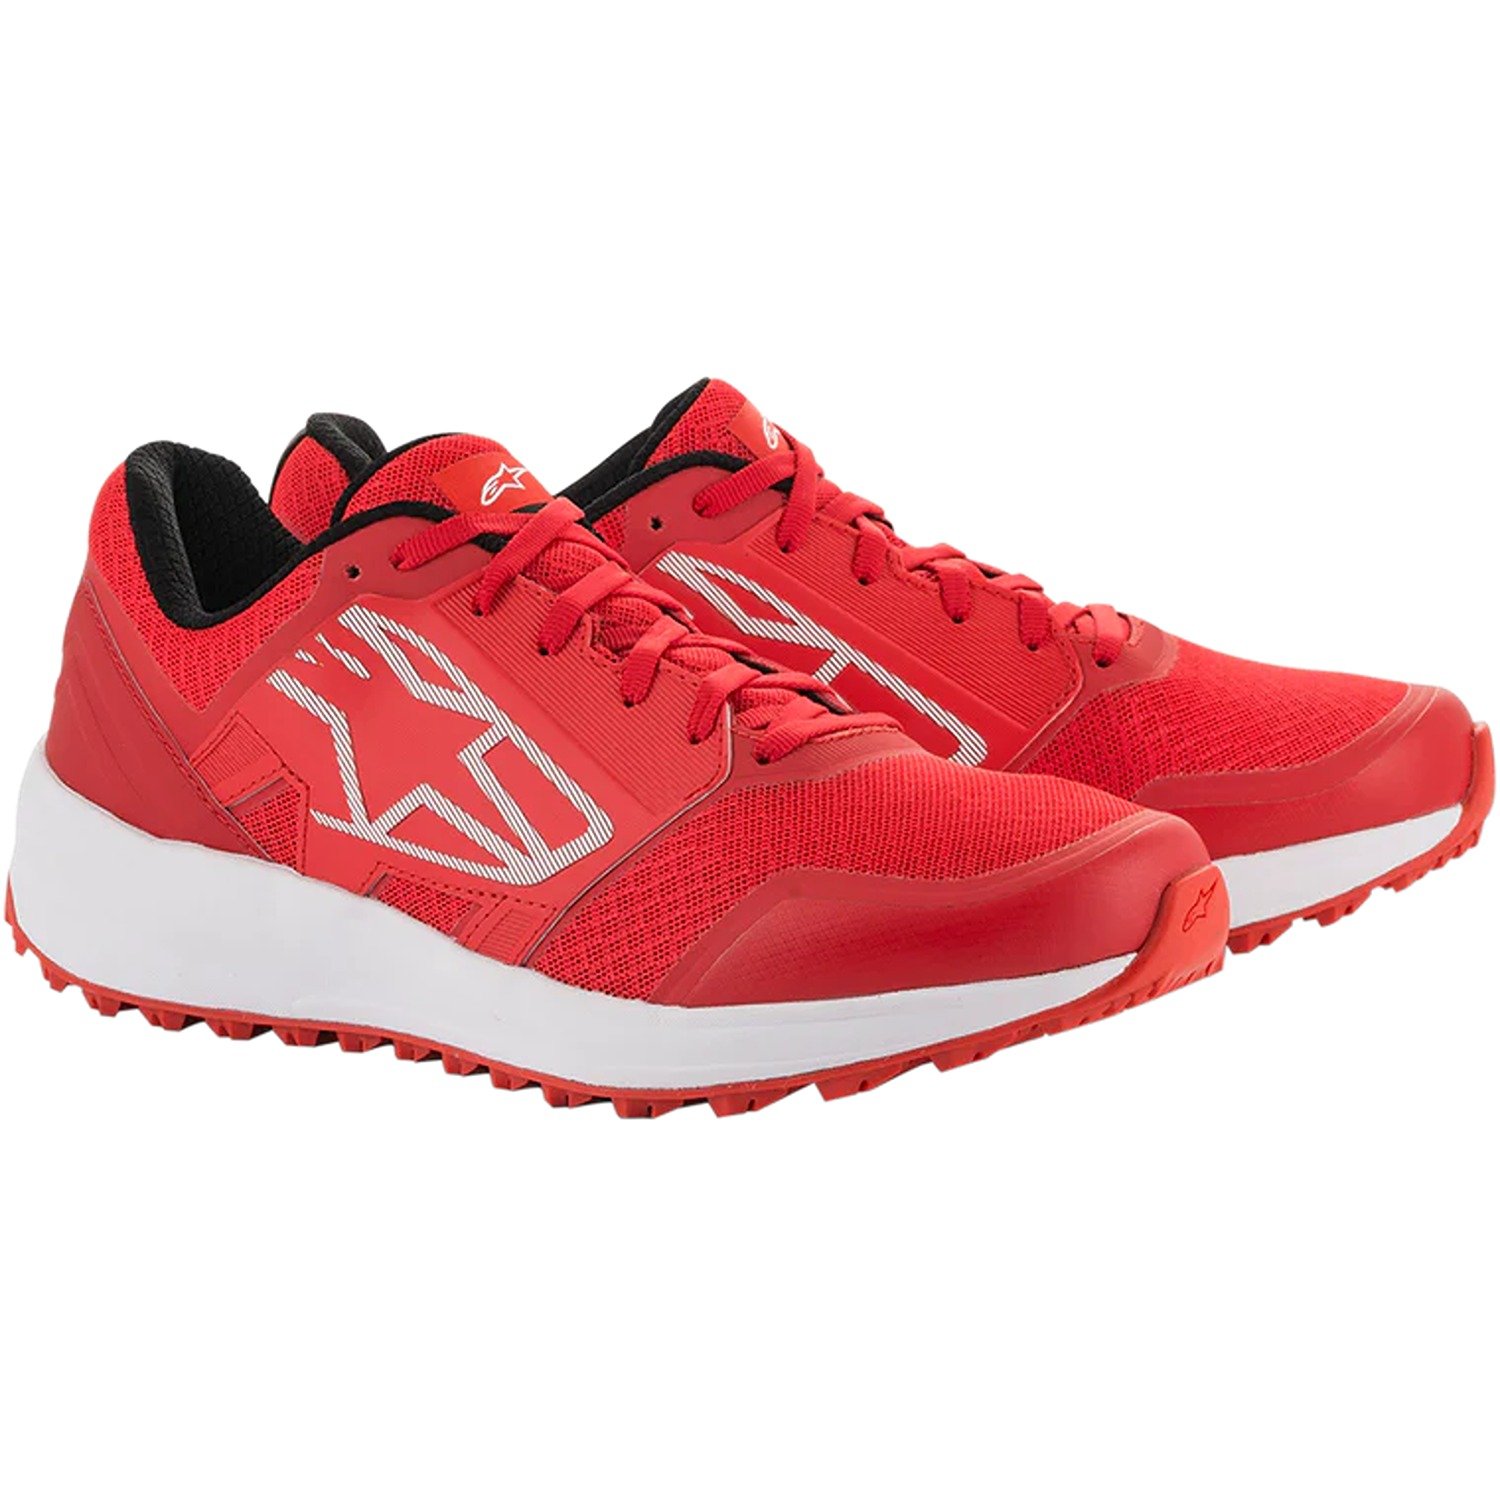 Image of EU Alpinestars Meta Trail Shoes Red White Taille US 85